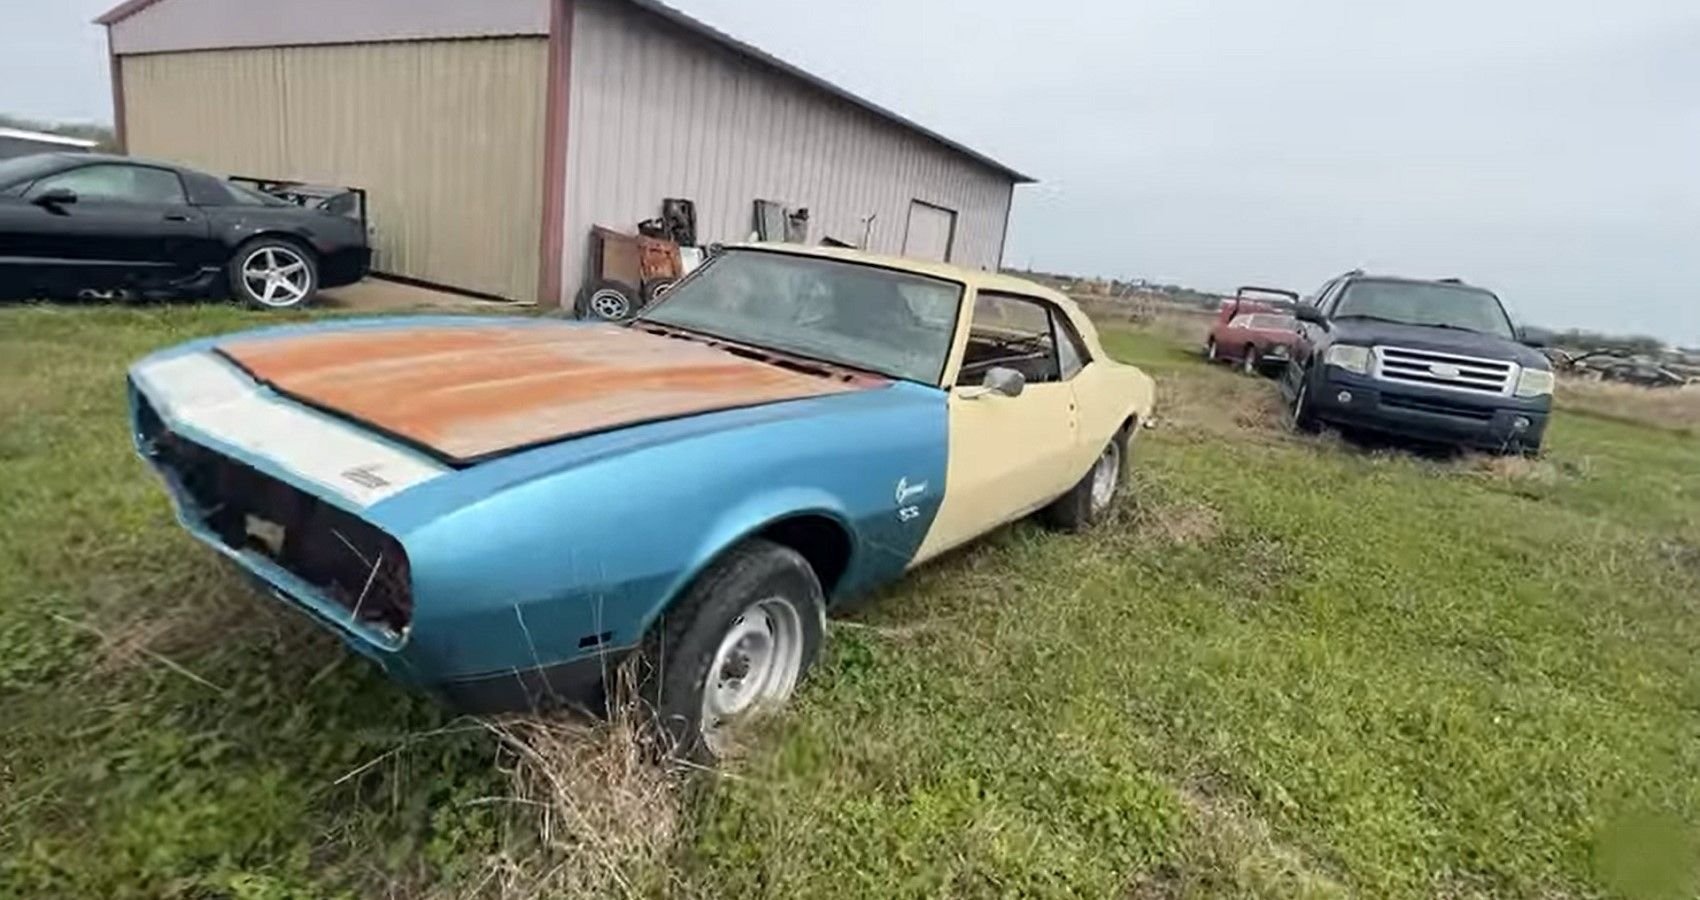 Barn Find Explorer Happens Upon Classic Treasures In Field Including Valuable Corvettes